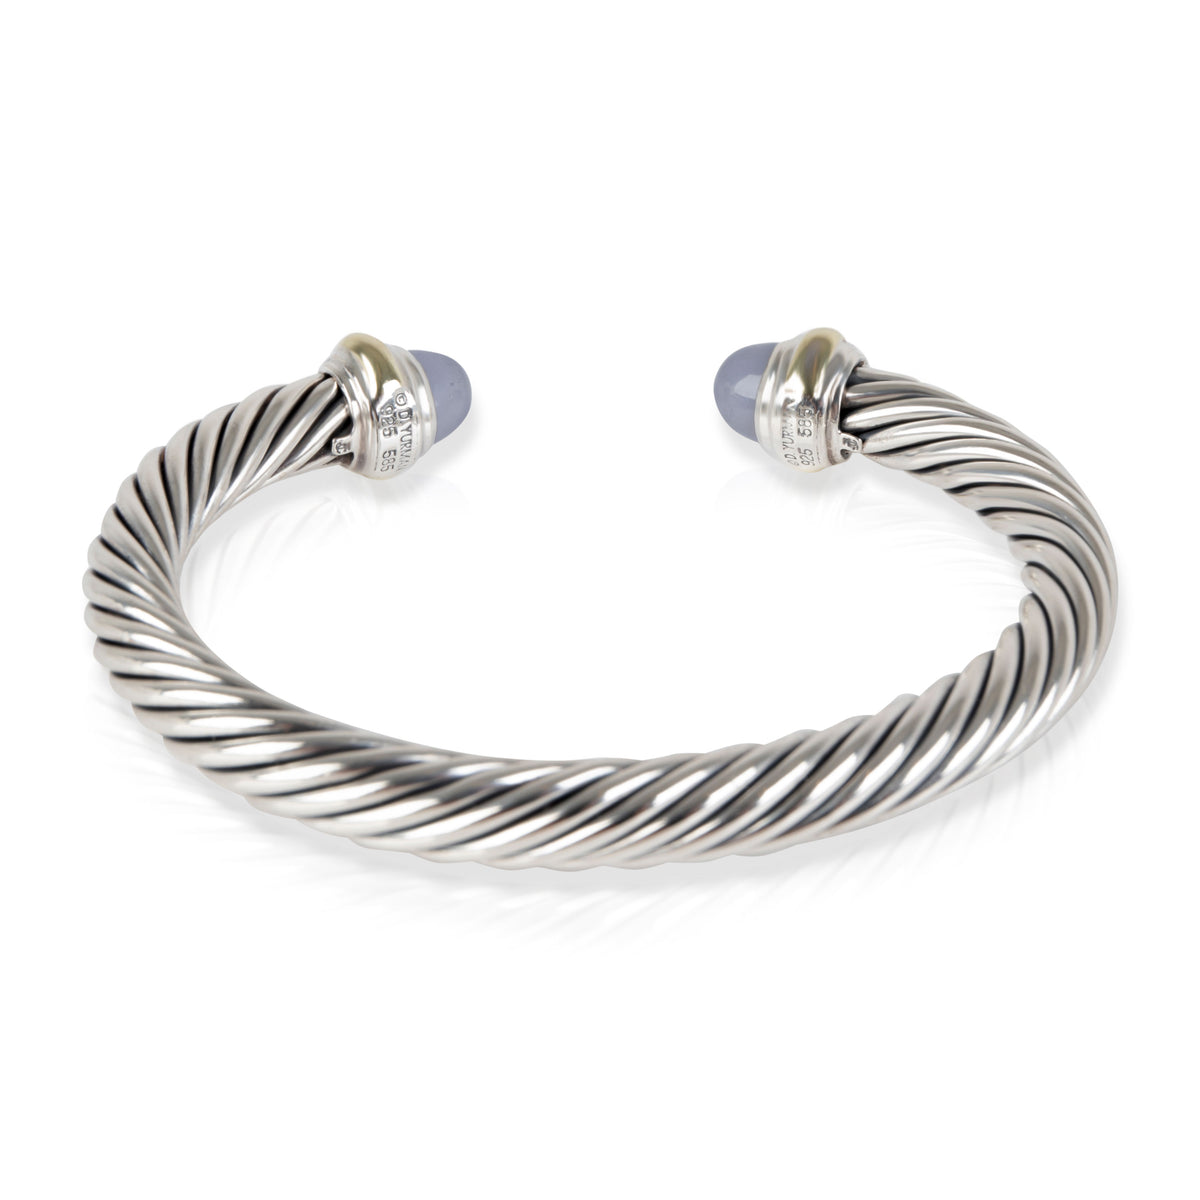 David Yurman Cable Chalcedony Cuff in 14K Yellow Gold/Sterling Silver